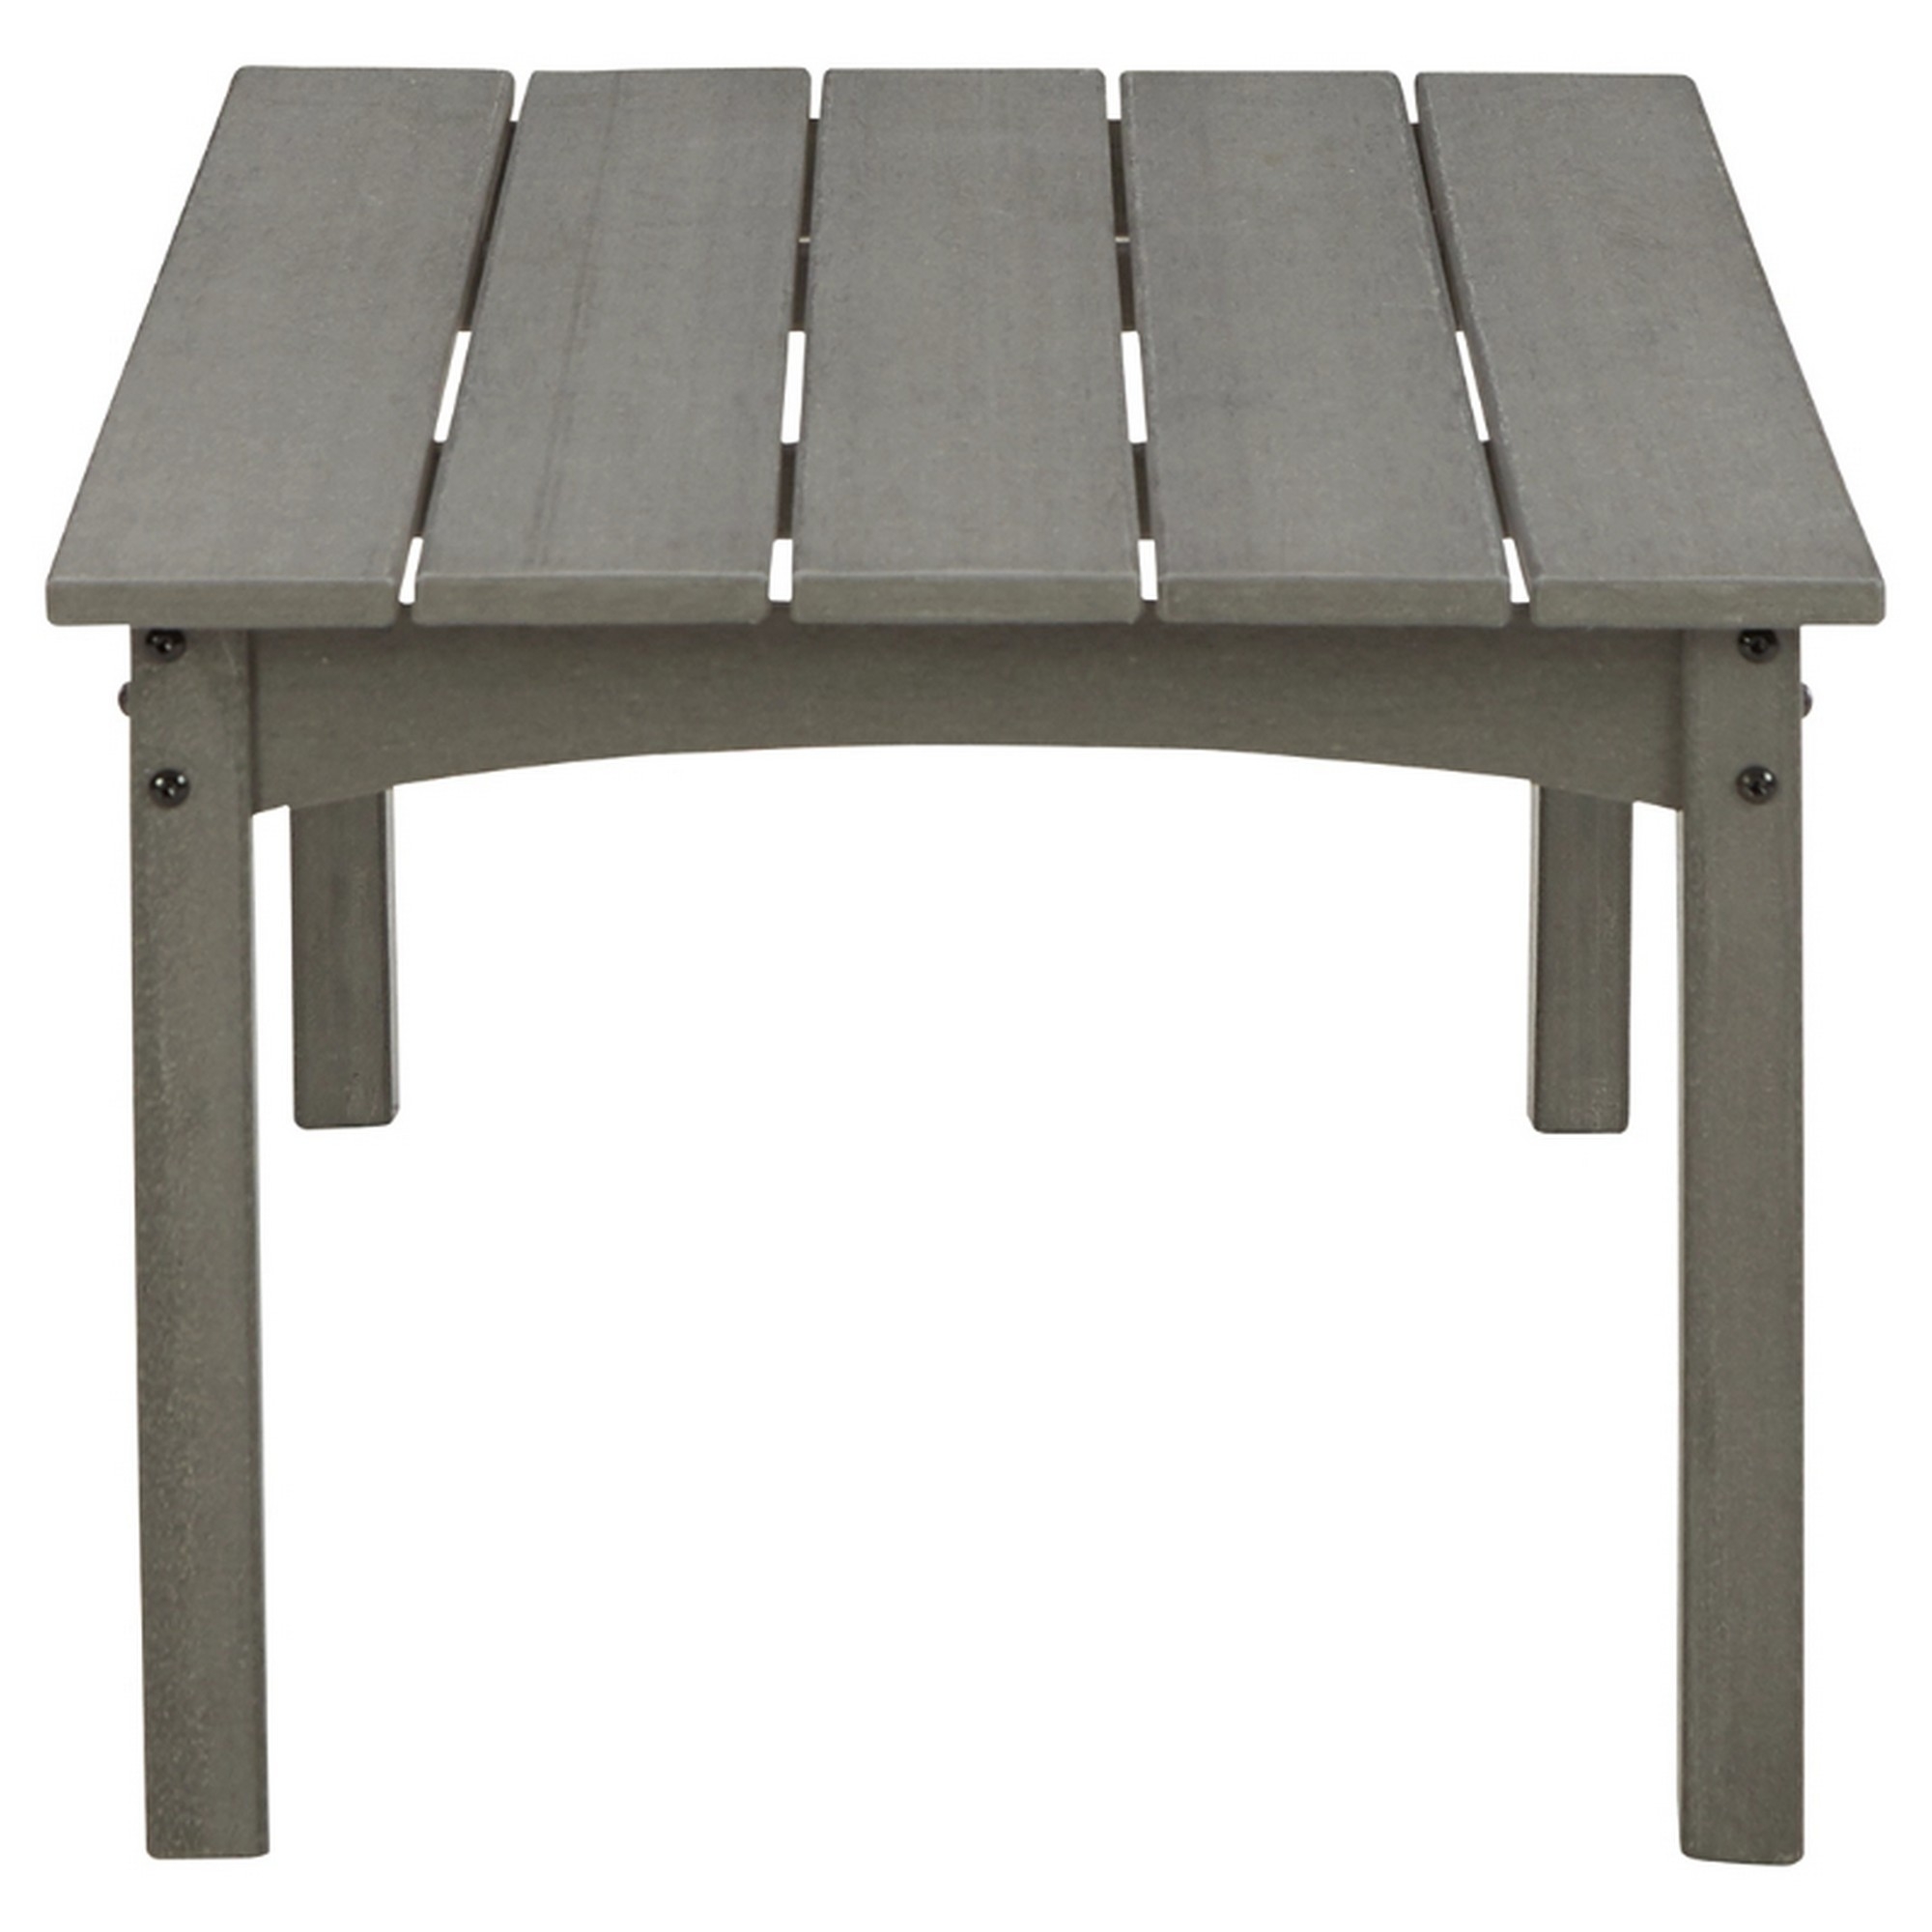 Cocktail Table With Slatted Top And Tapered Legs, Gray- Saltoro Sherpi